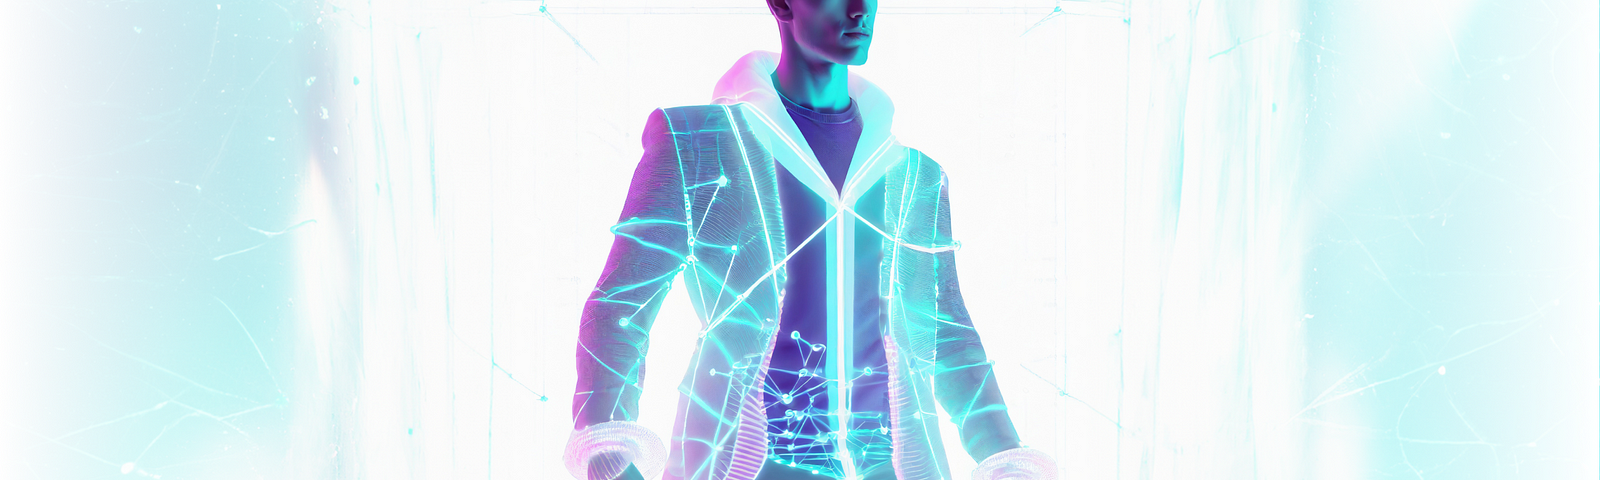 Digital mannequin showcasing a holographic jacket representing the New Era of Product Visualization for fashion brands, emphasizing the benefits of Advanced 3D Viewing Technologies.